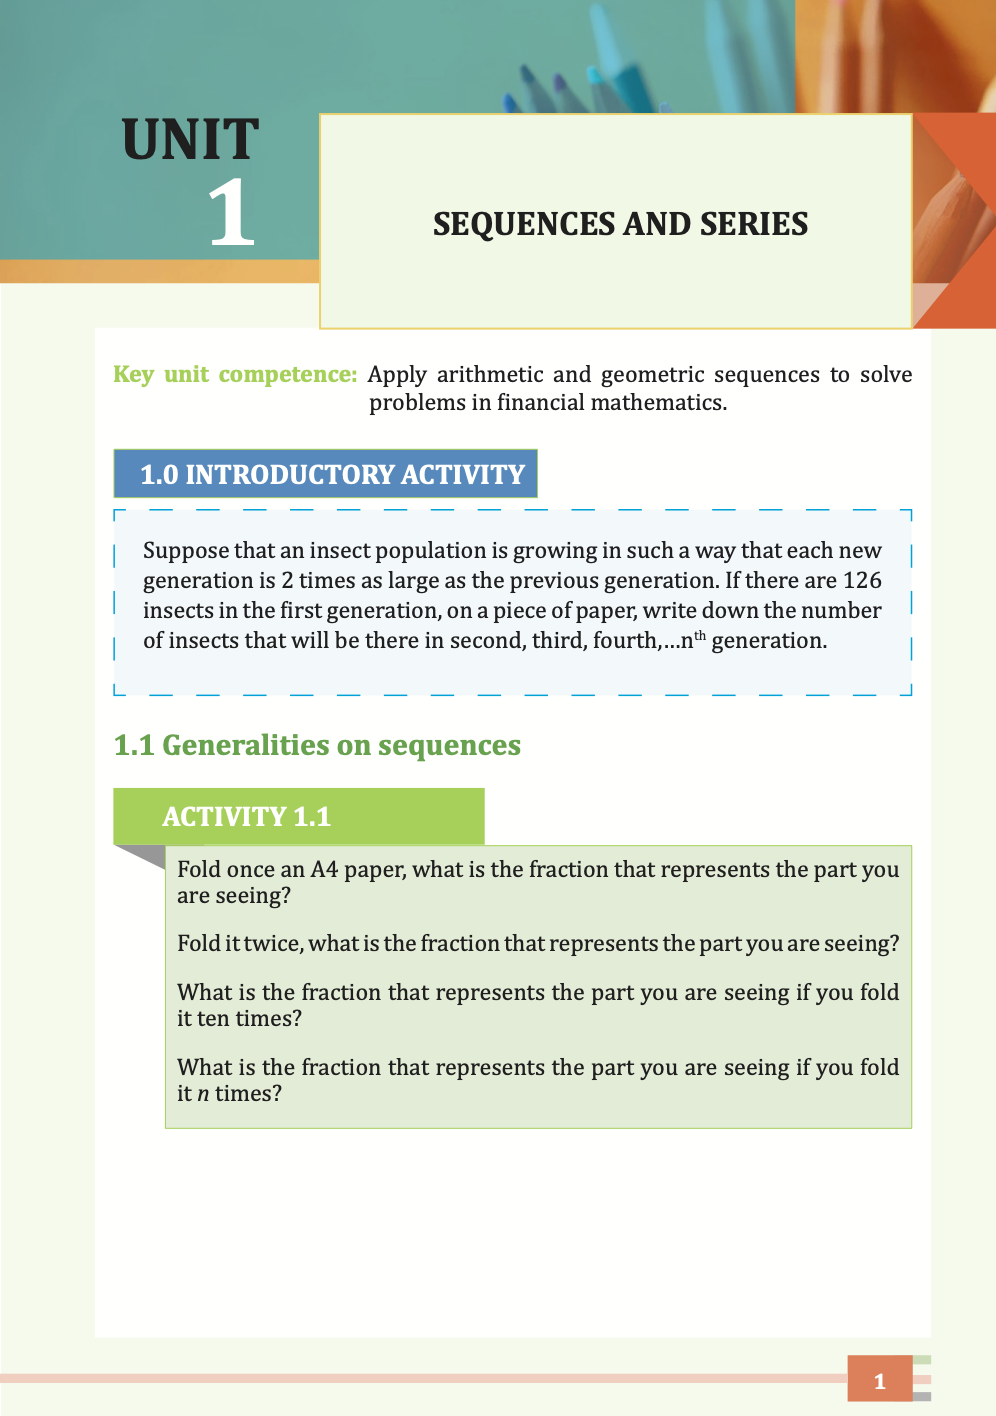 UNIT 

 1

SEQUENCES AND SERIES

Key unit competence: Apply arithmetic and geometric sequences to solve 
problems in financial mathematics. 

1.0 INTRODUCTORY ACTIVITY

Suppose that an insect population is growing in such a way that each new 
generation is 2 times as large as the previous generation. If there are 126 
insects in the first generation, on a piece of paper, write down the number 
of insects that will be there in second, third, fourth,…nth generation.



1.1 Generalities on sequences

ACTIVITY 1.1

Fold once an A4 paper, what is the fraction that represents the part you 
are seeing?

Fold it twice, what is the fraction that represents the part you are seeing?

What is the fraction that represents the part you are seeing if you fold 
it ten times?

What is the fraction that represents the part you are seeing if you fold 
it n times?